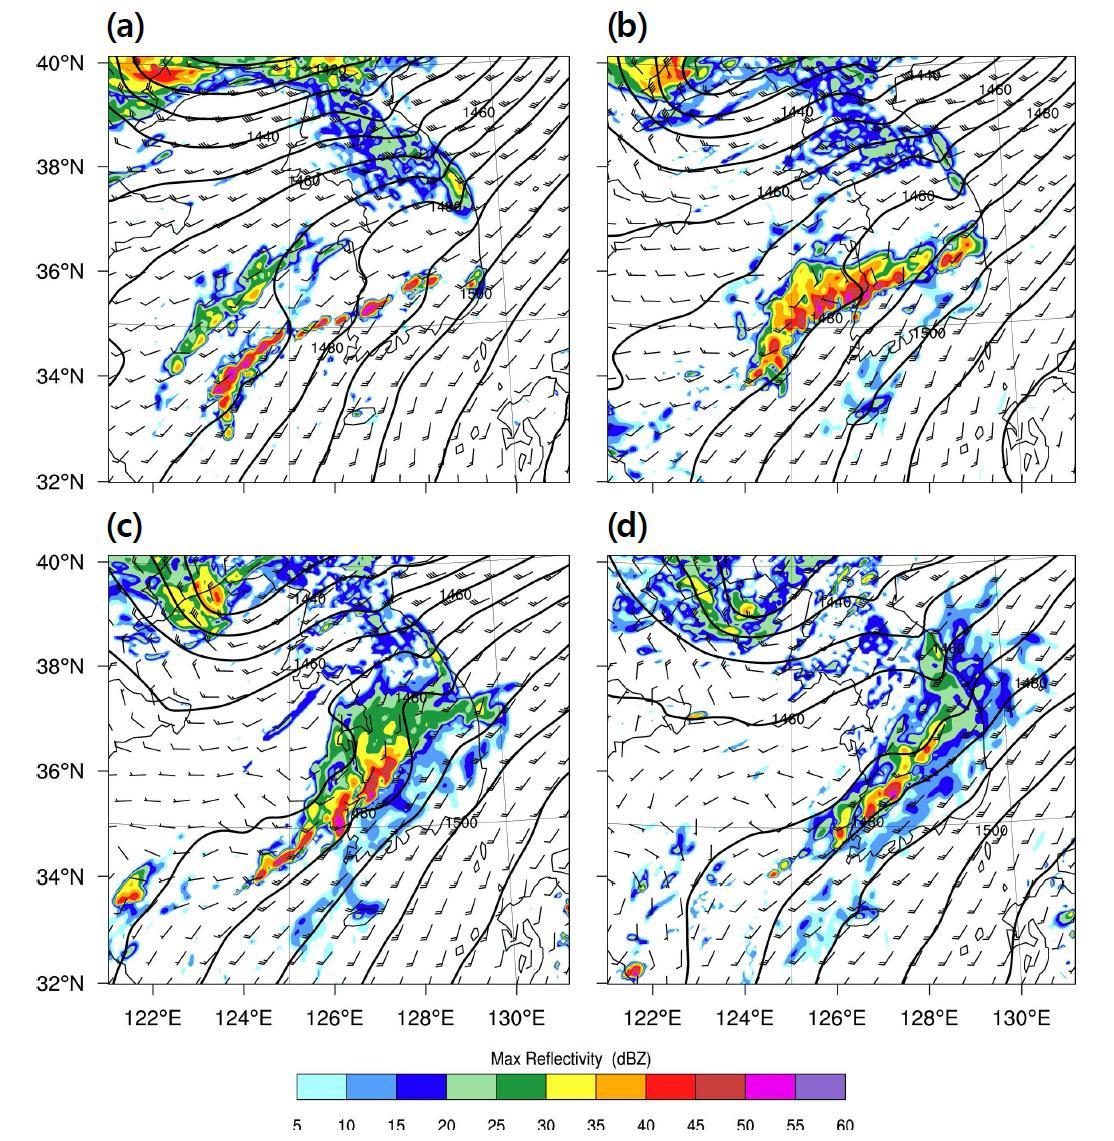 Simulated 850-hPa height (solid lines), winds and reflectivity (shaded) from CTRL for (a) 0600 KST, (b) 0900 KST, (c) 1200 KST and (d) 1500 KST 9 August 2011.